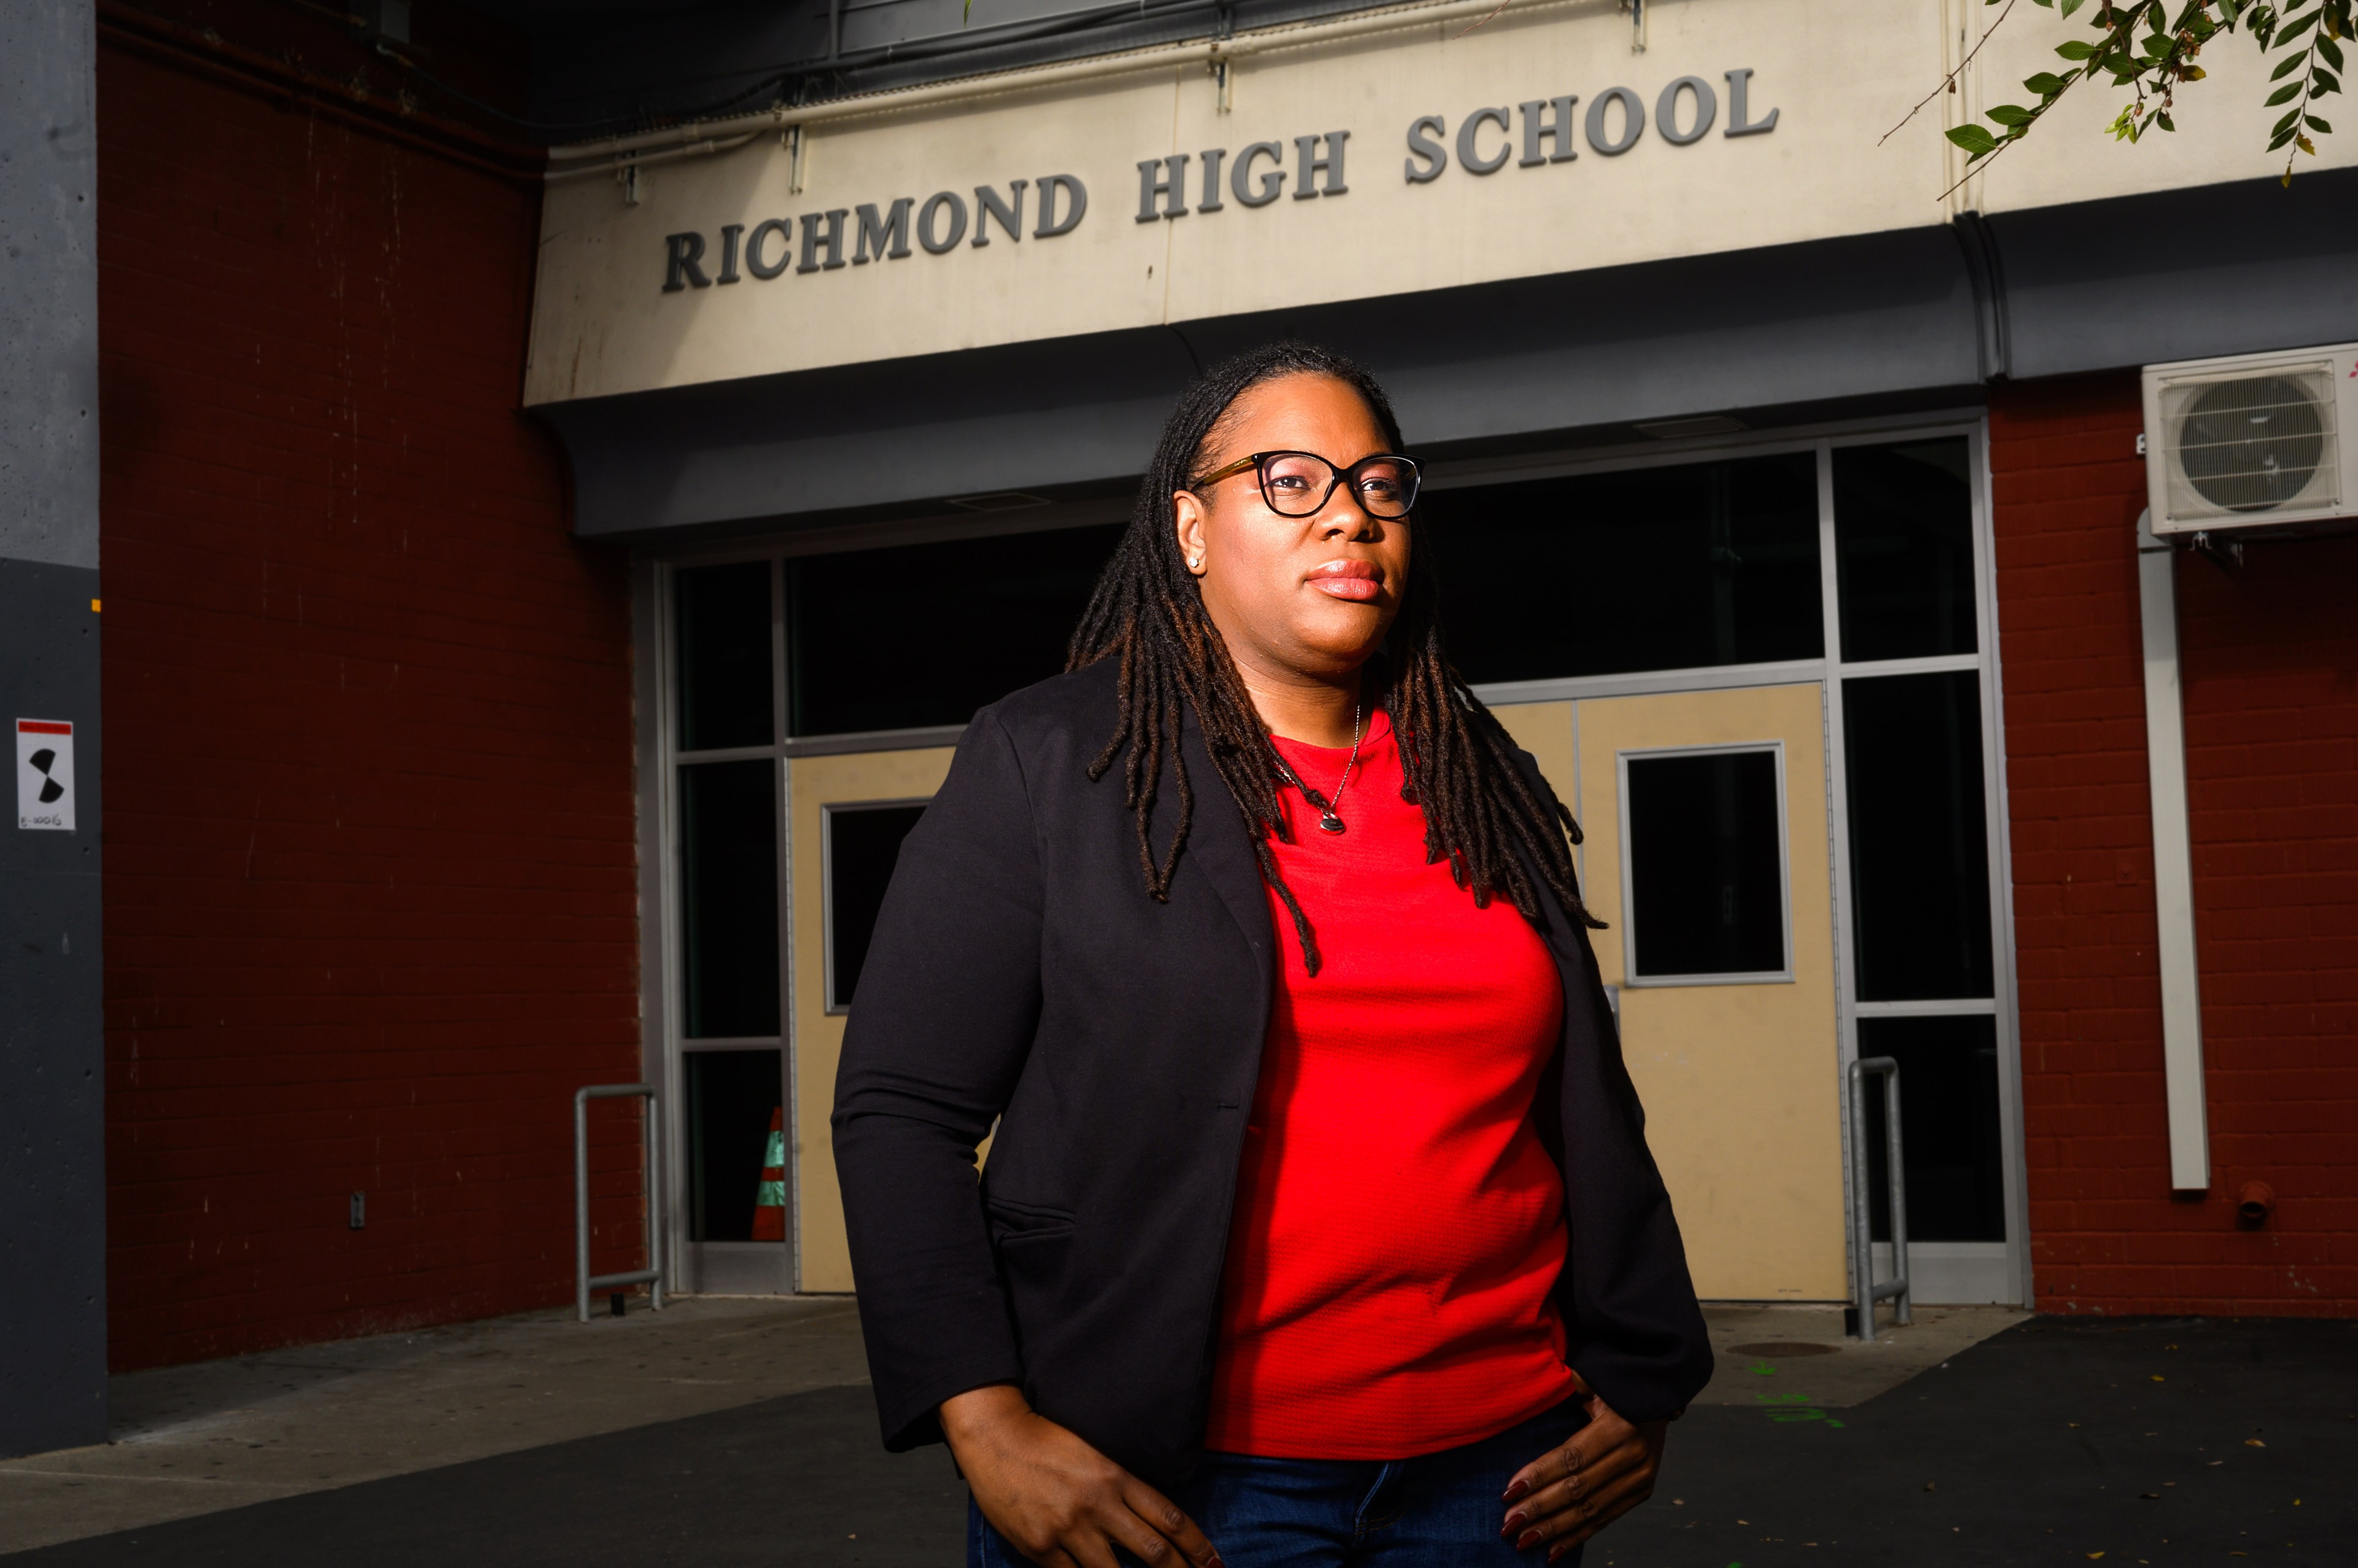 Vieneese Kelly stands in front of Richmond High School.